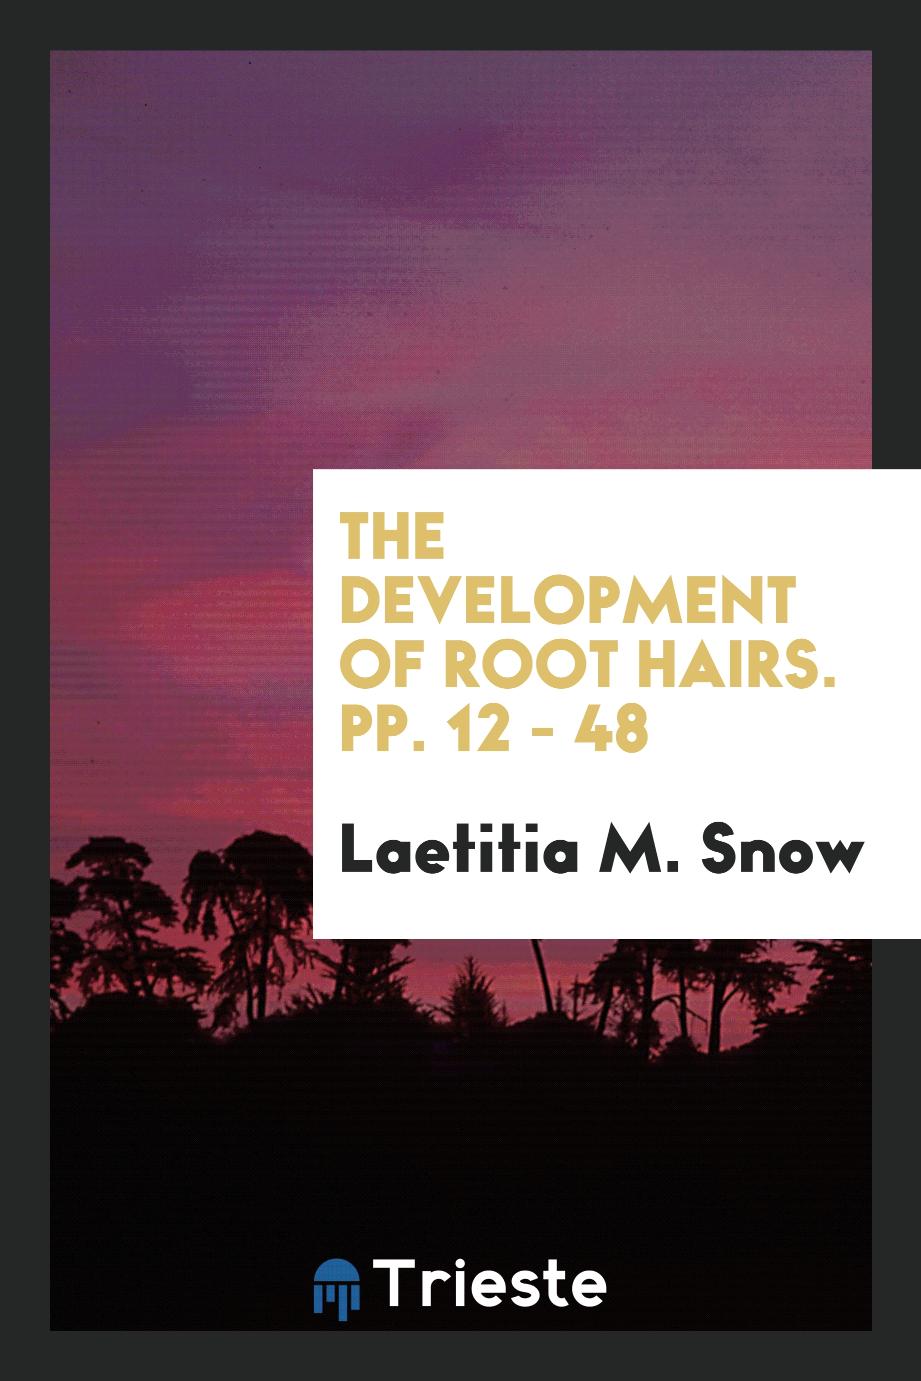 The Development of Root Hairs. pp. 12 - 48